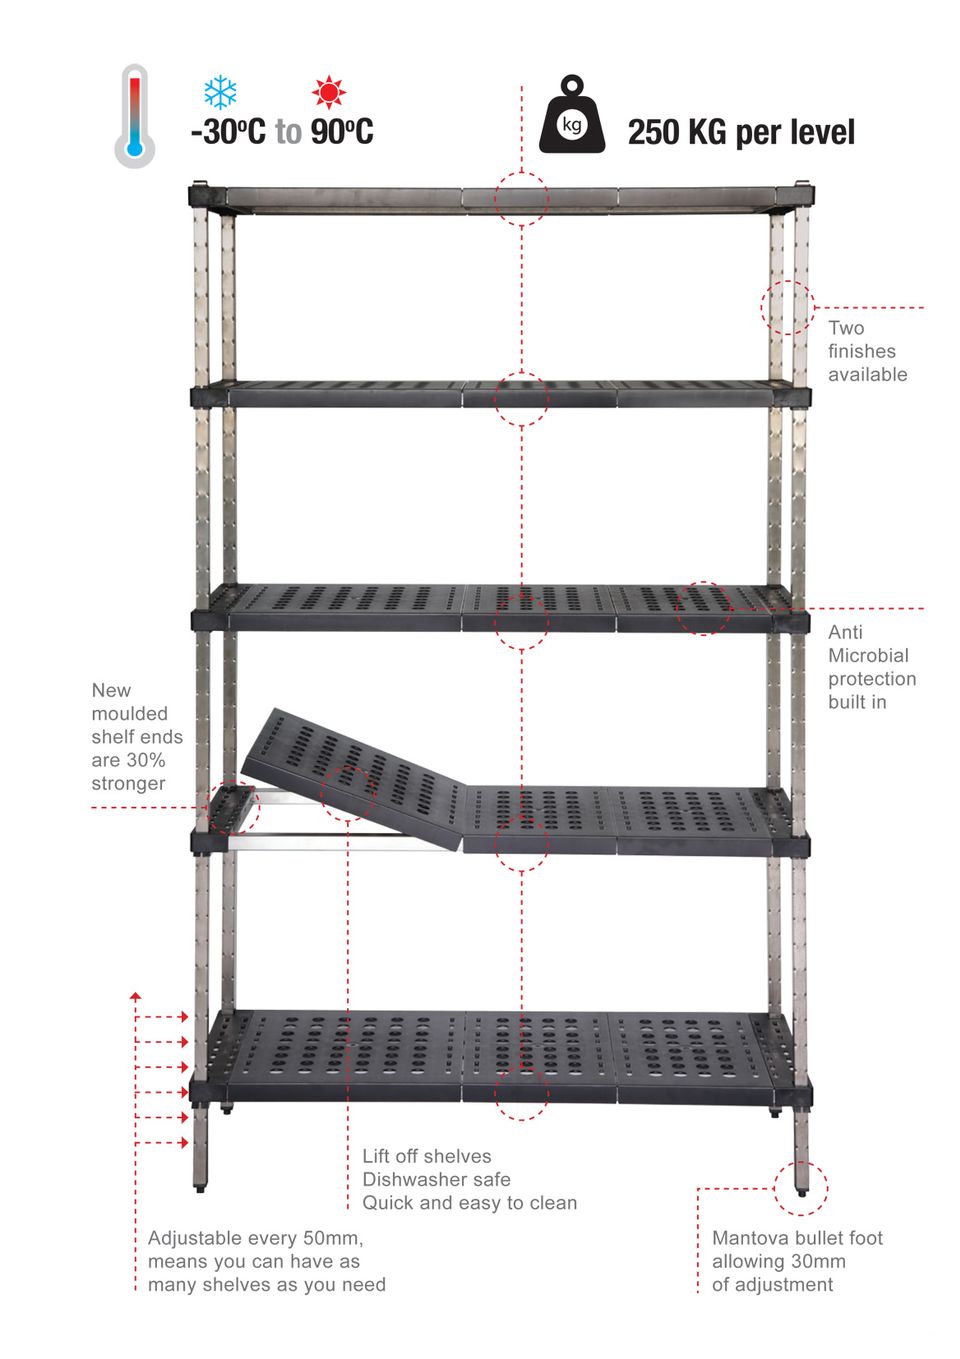 Tuff Shelving specifications